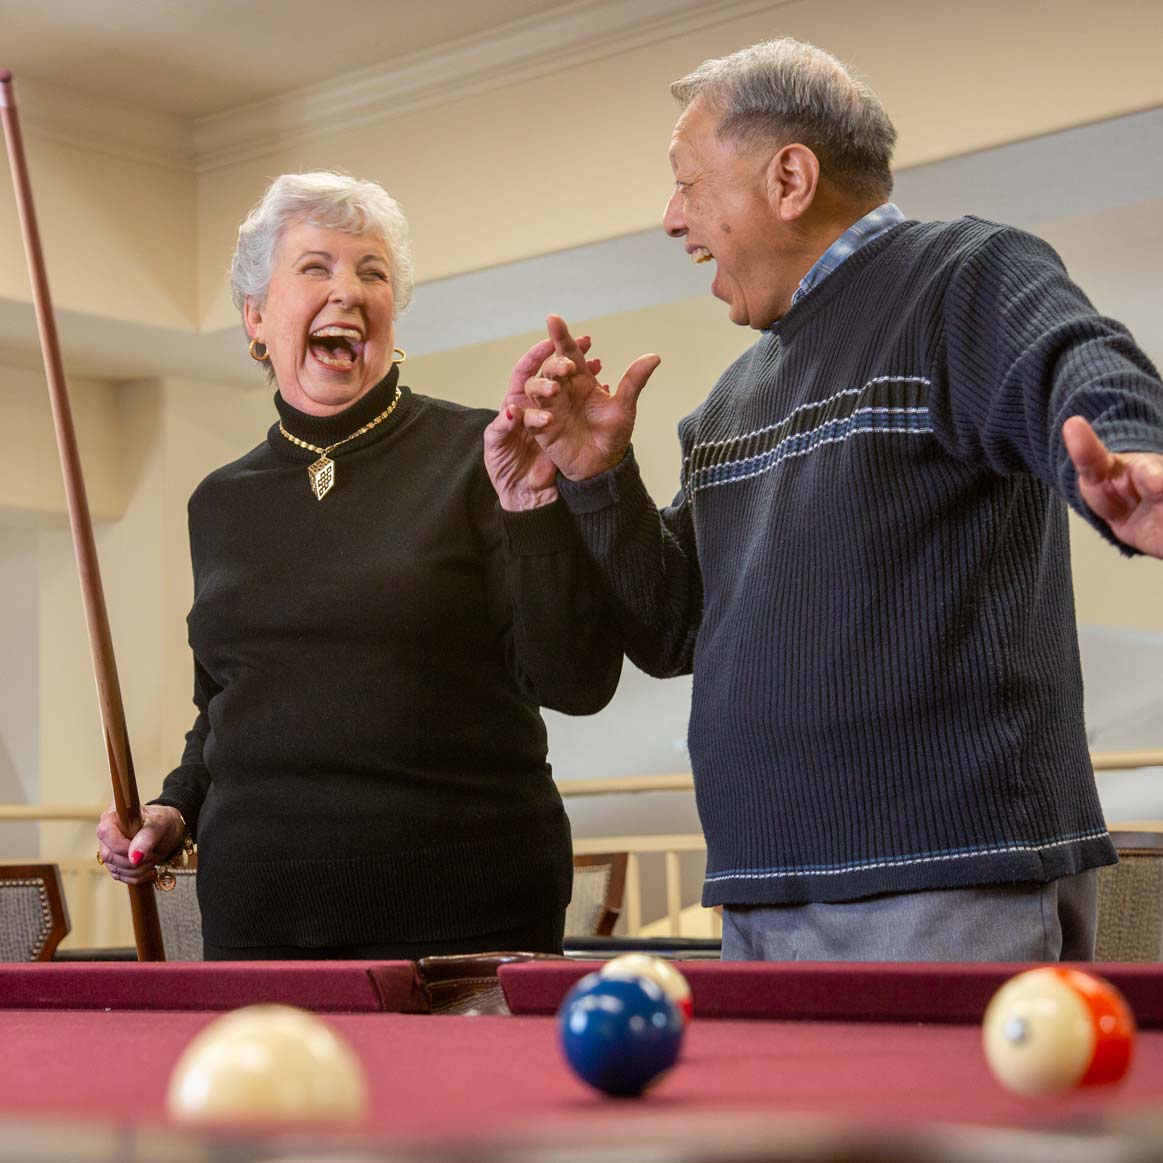 Two elderly people, one man and one woman, are standing next to a pool table, joyfully laughing. The woman is holding a pool cue, while the man gestures animatedly with his hands. Several pool balls are visible on the table in the foreground.